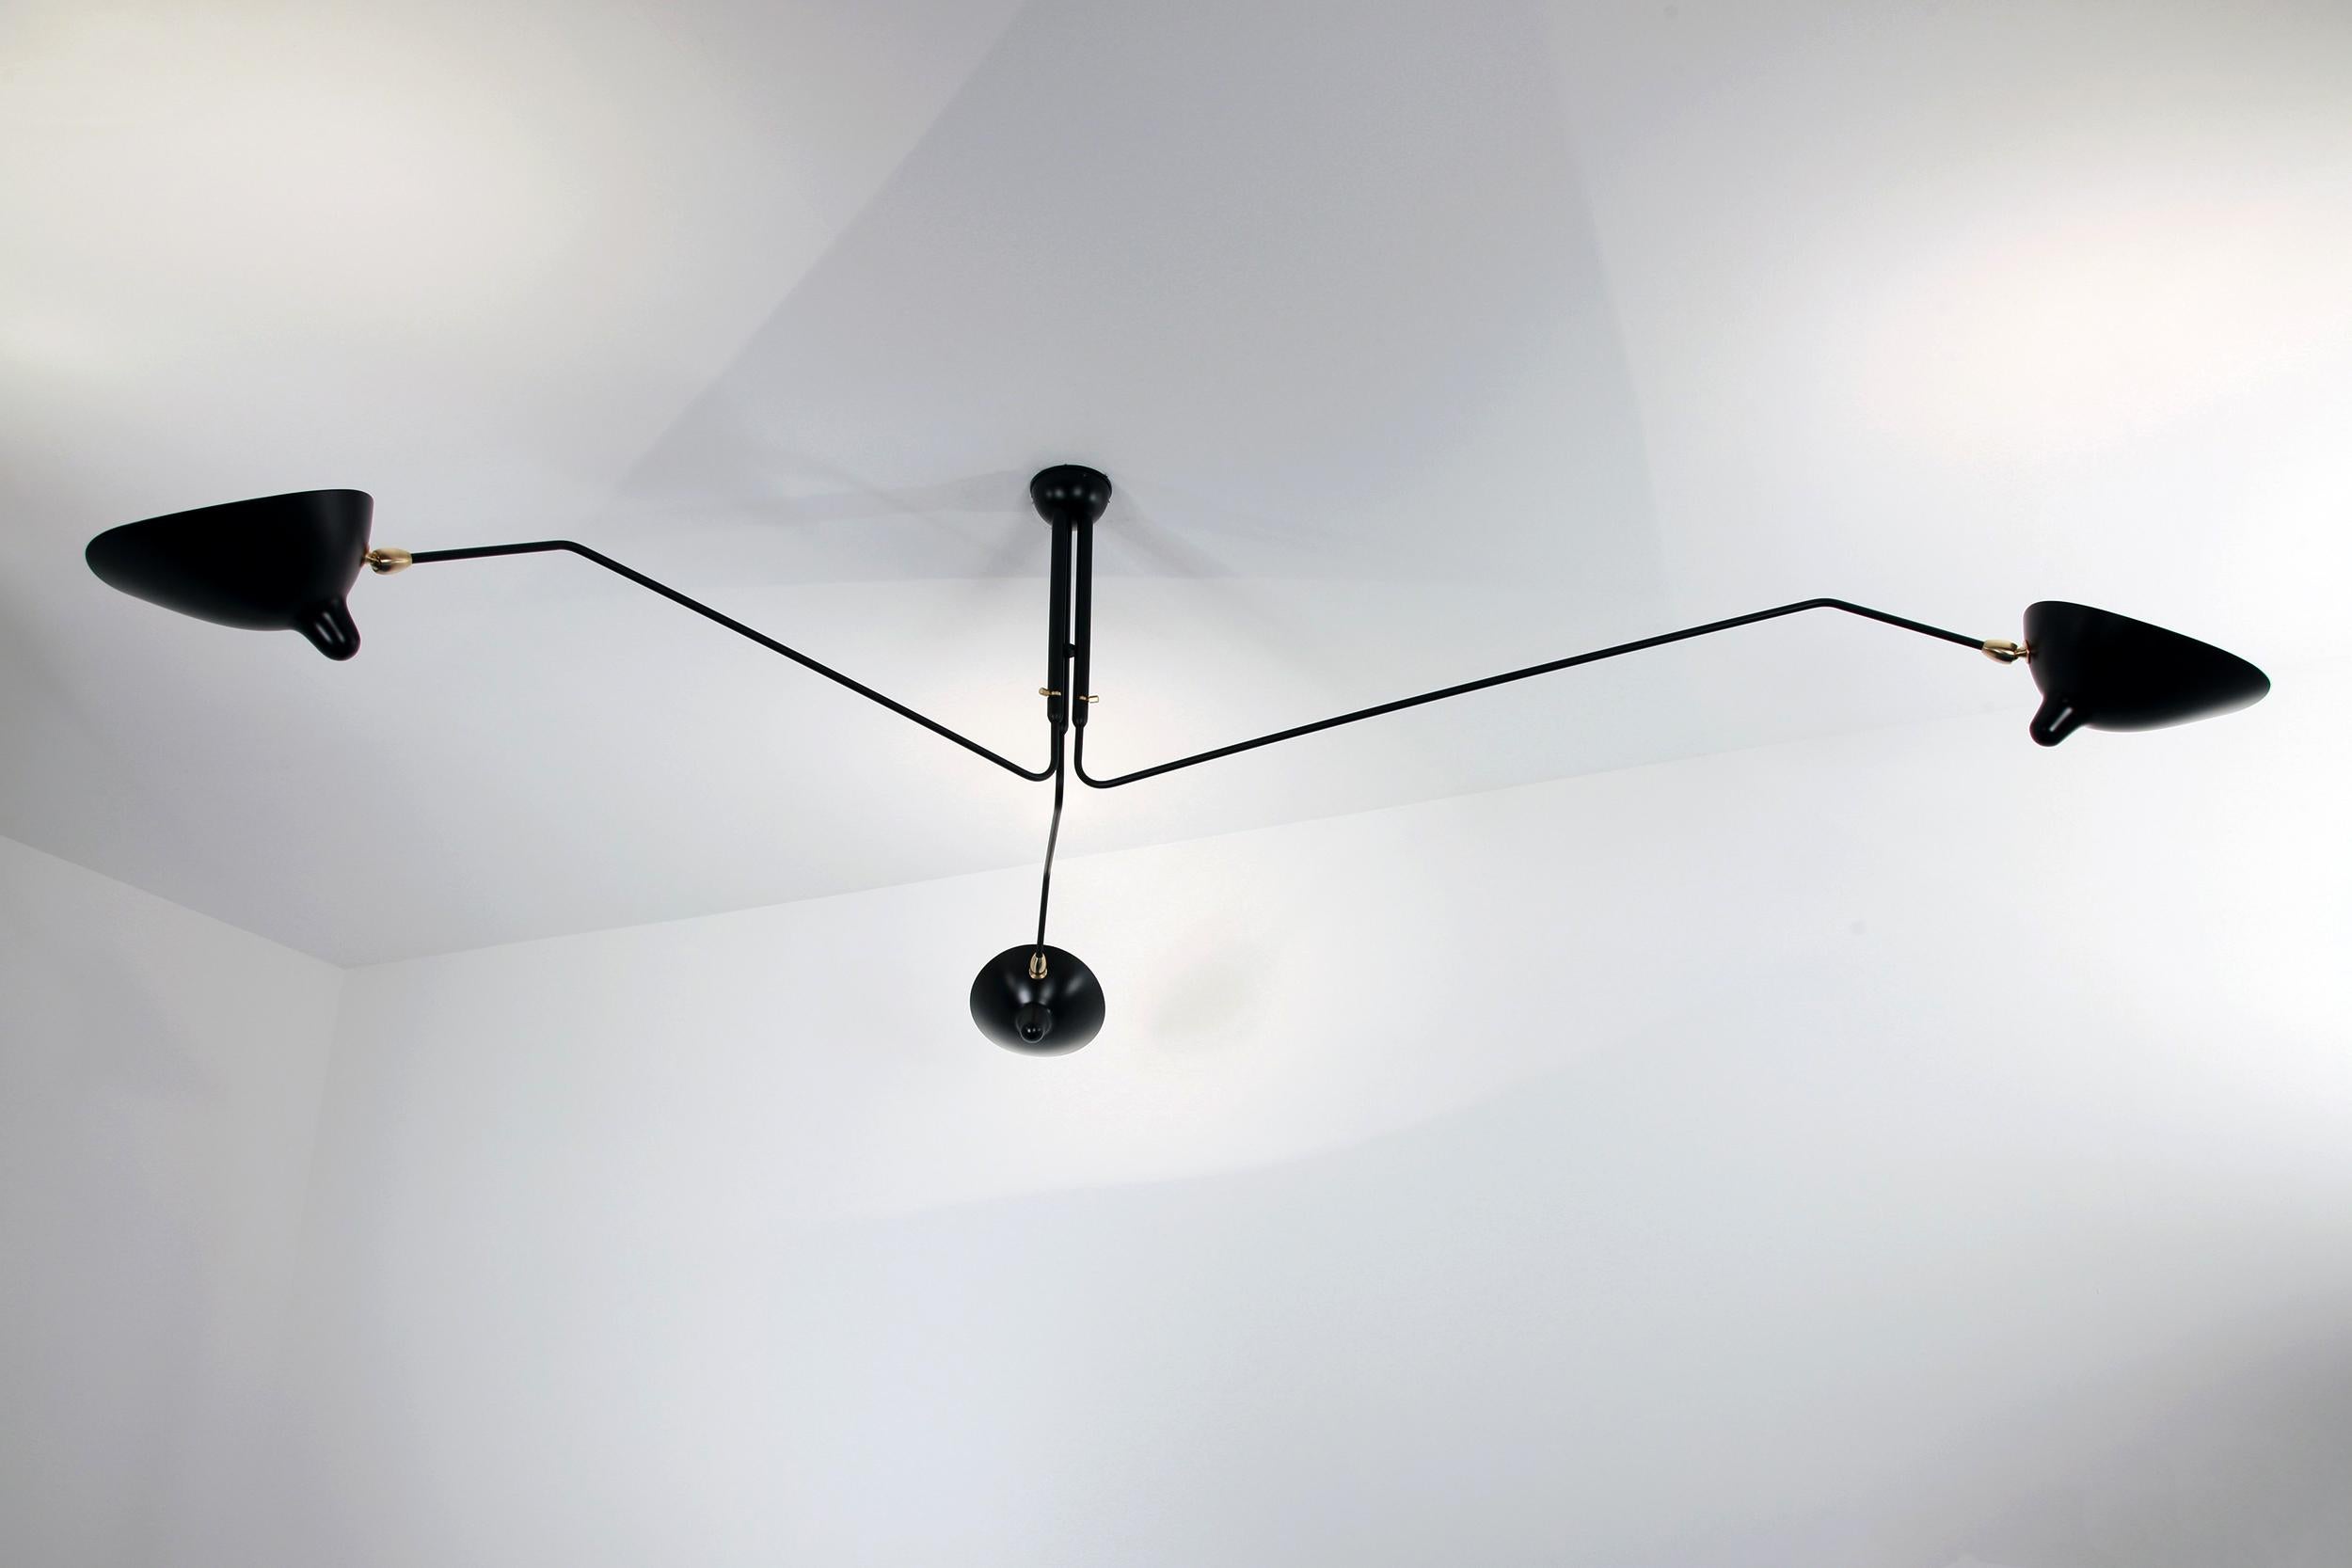 Aluminum Serge Mouille - Ceiling Lamp 3 Rotating Arms - DROP, ARM LENGTH CUSTOMIZABLE! For Sale